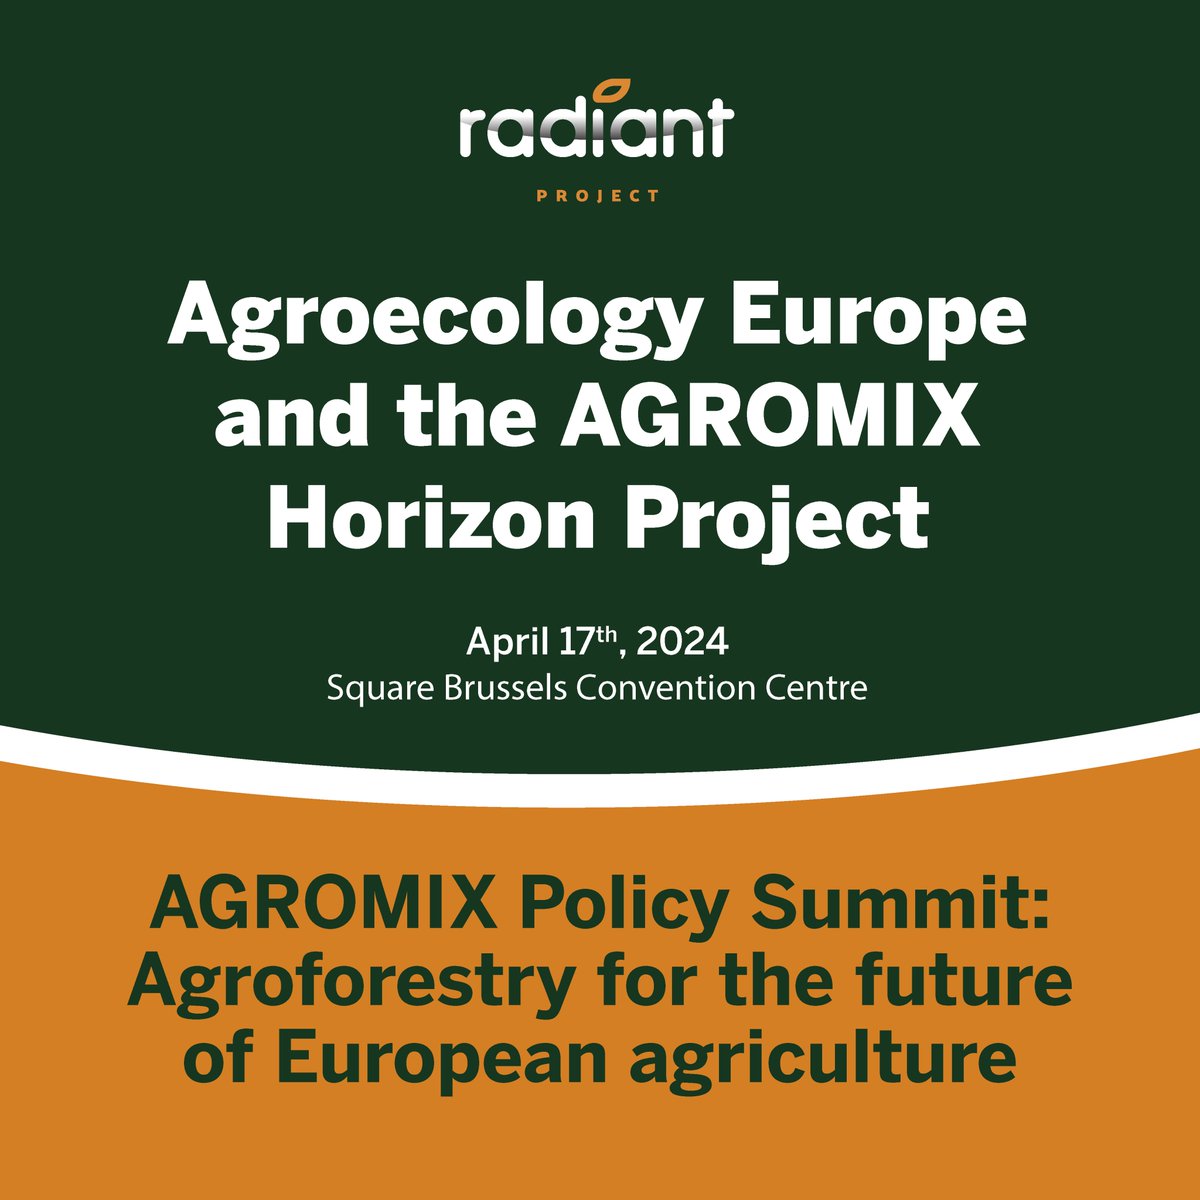 🌱 This month, join us at the AGROMIX Policy Summit to uncover all the best agroecological policy solutions! 👉 Register here: swki.me/83D72EWd #RADIANT #AGROMIX #PolicySummit